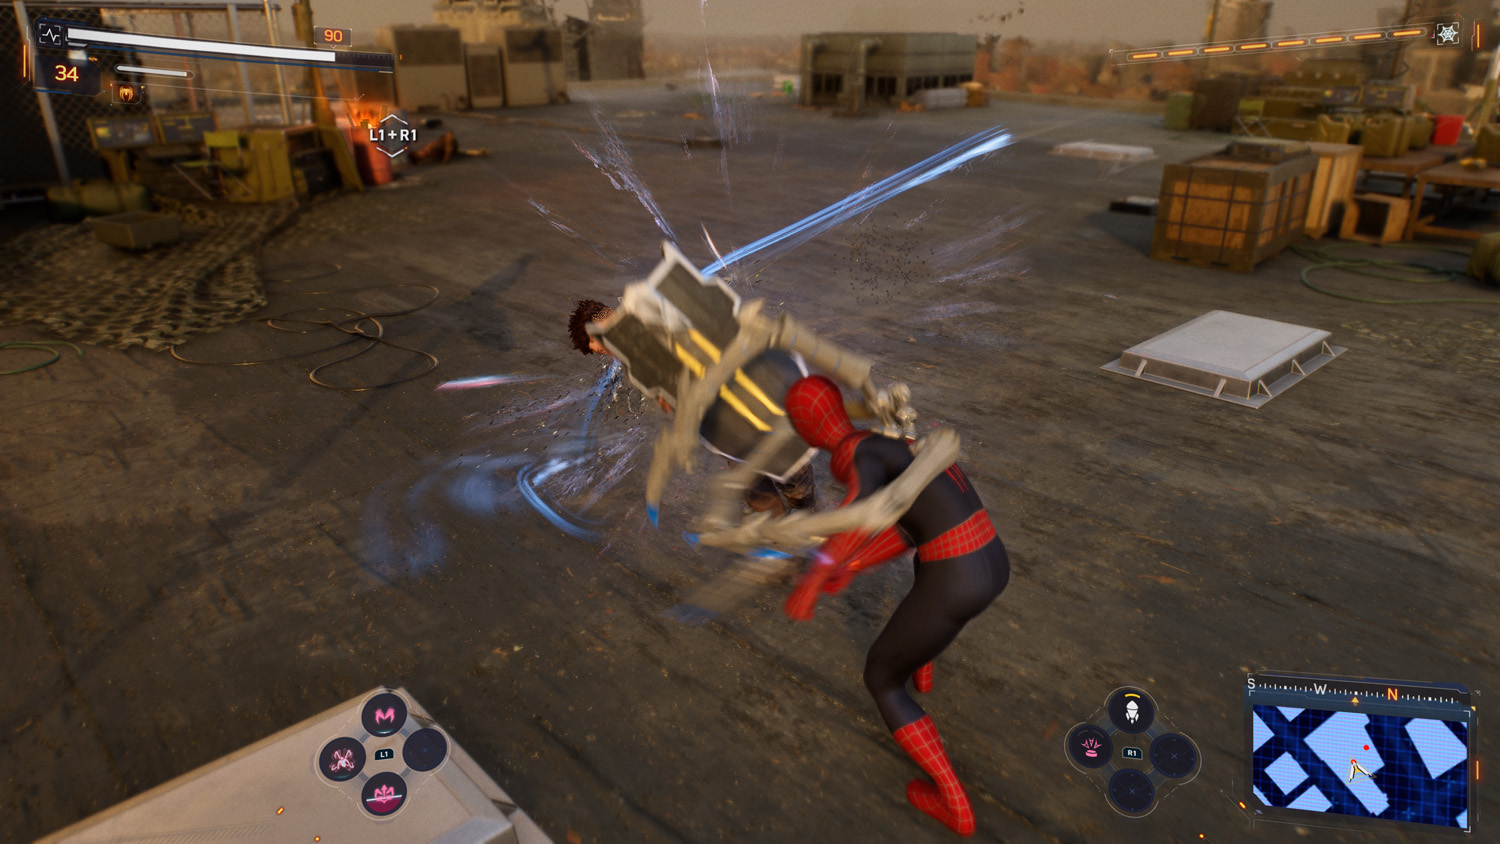 Marvel's Spider-Man 2 review: swing when you're winning